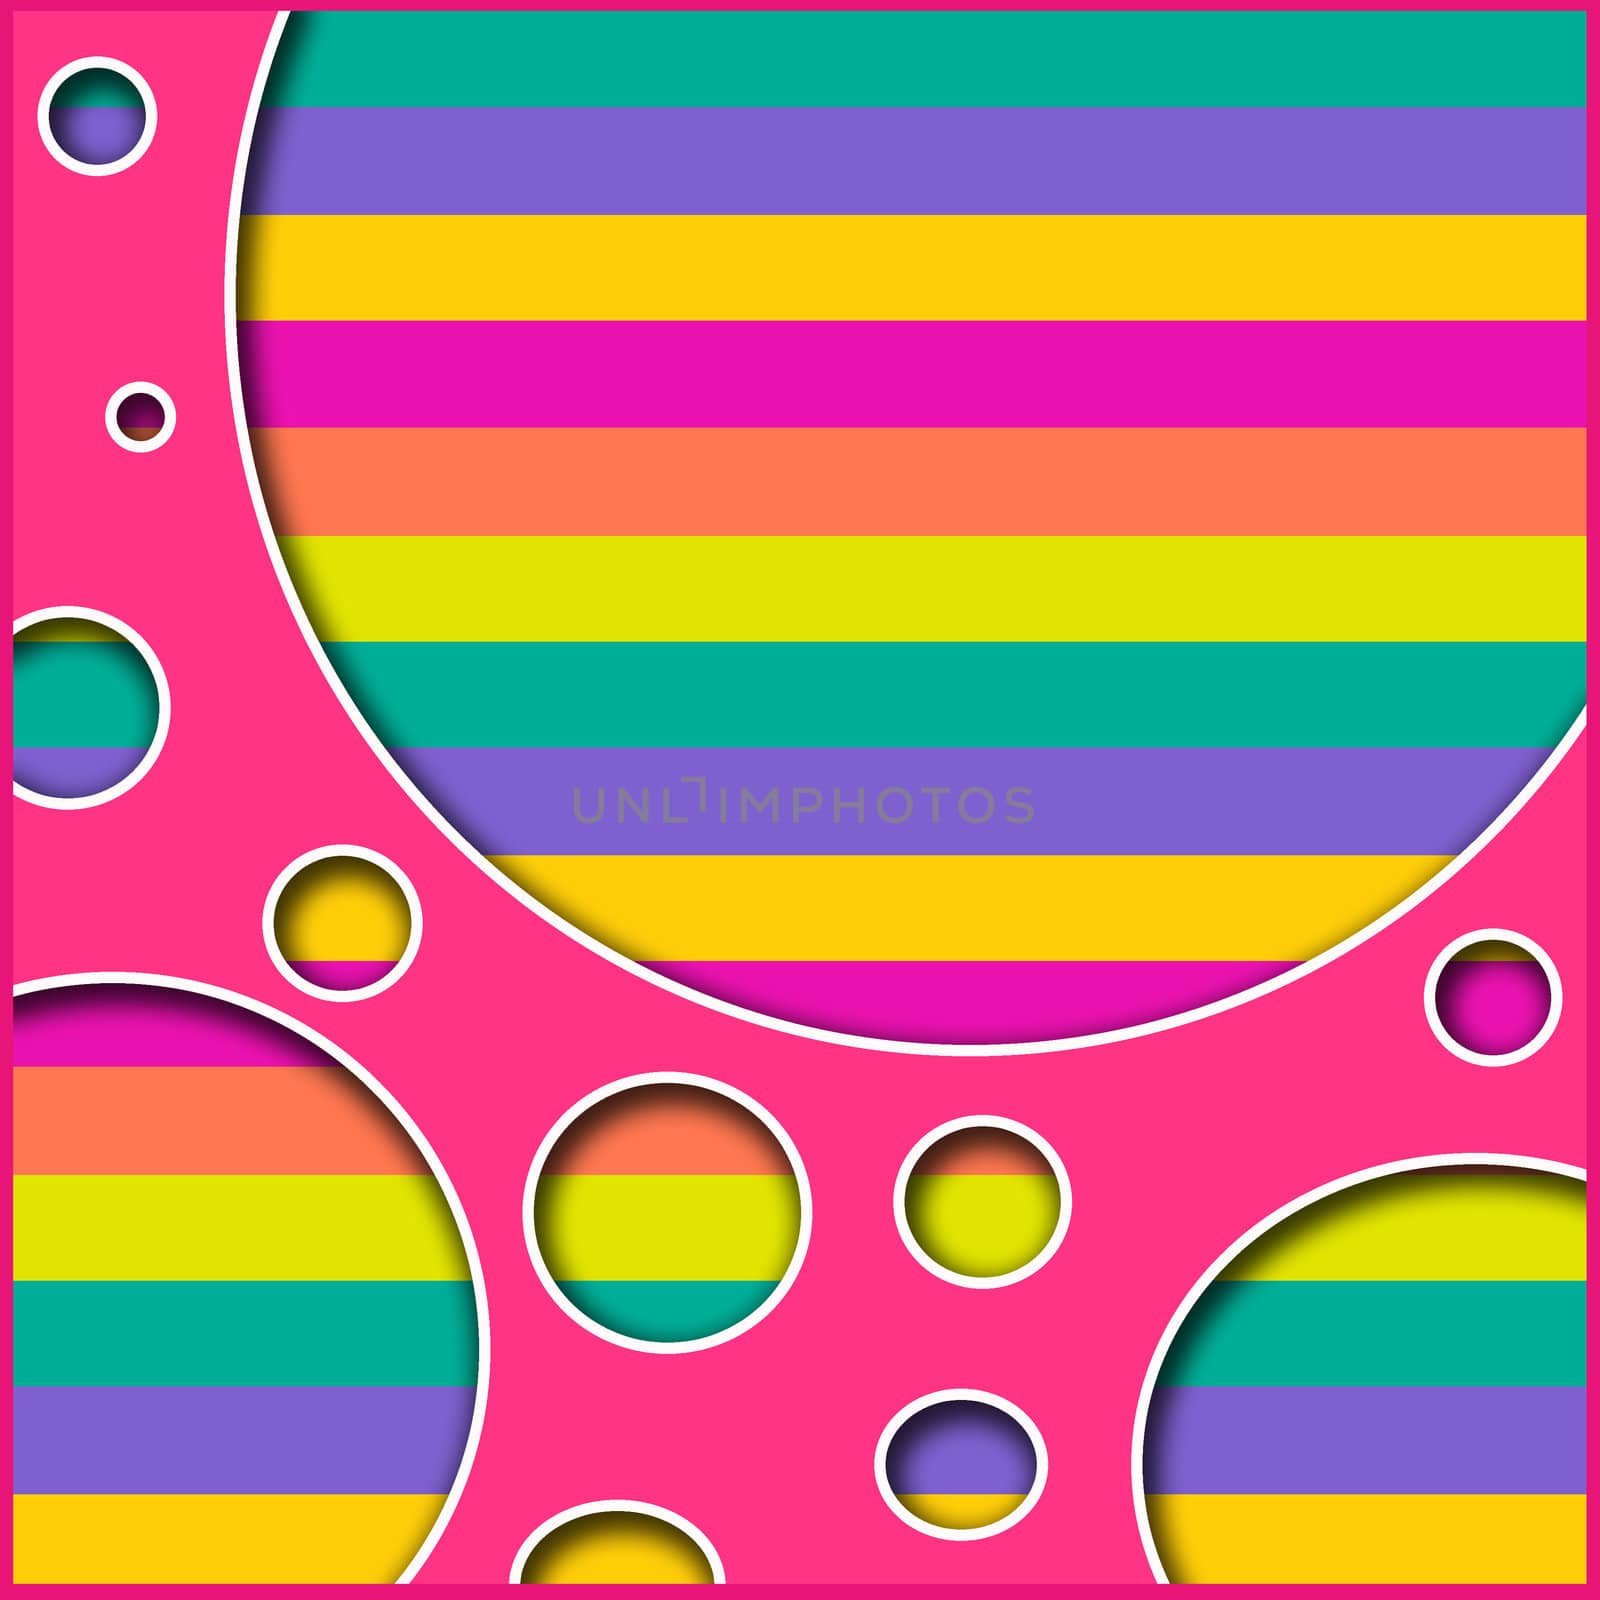 colorful retro style funky background